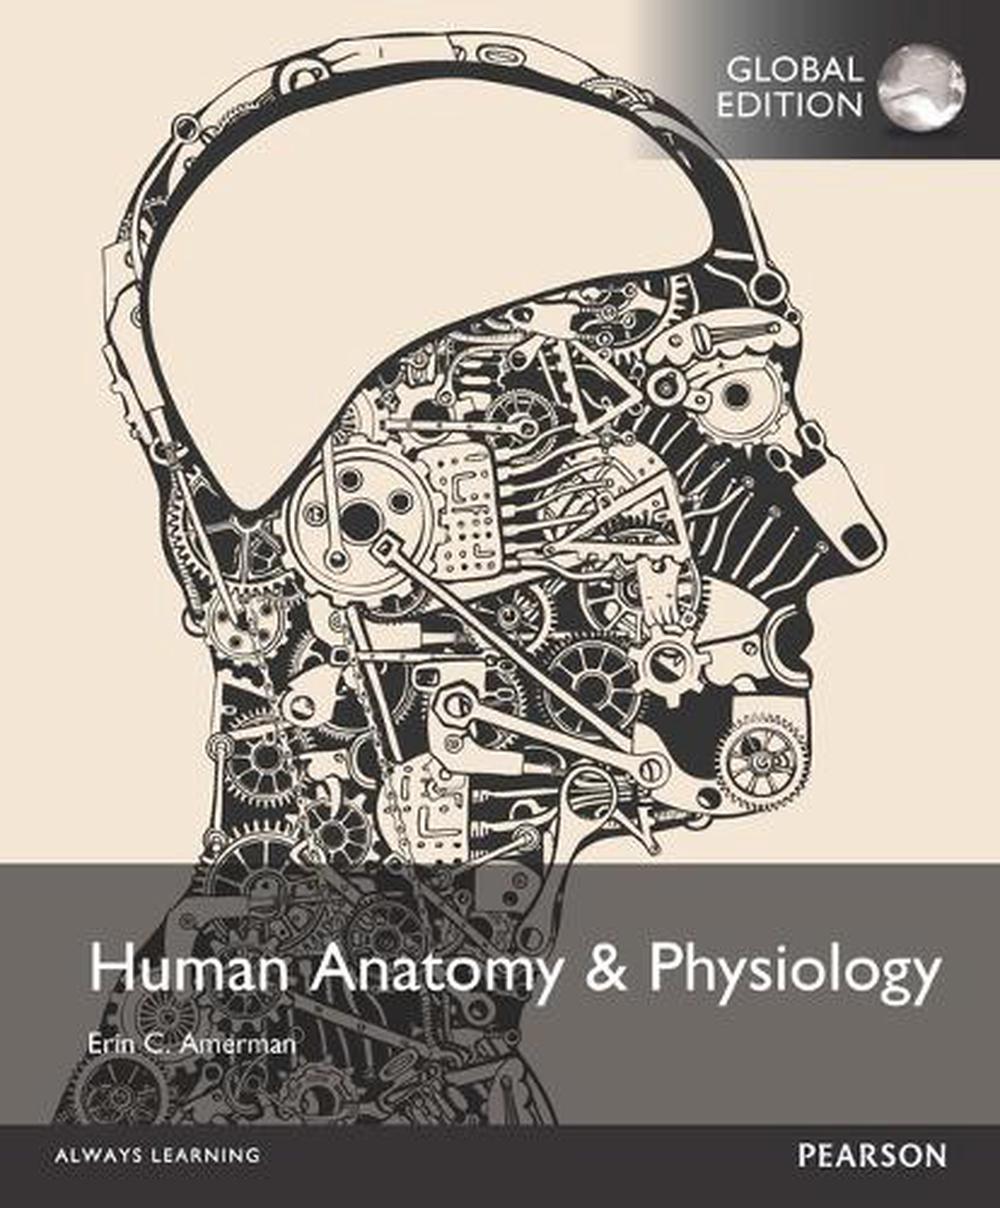 Image result for human anatomy and physiology global edition